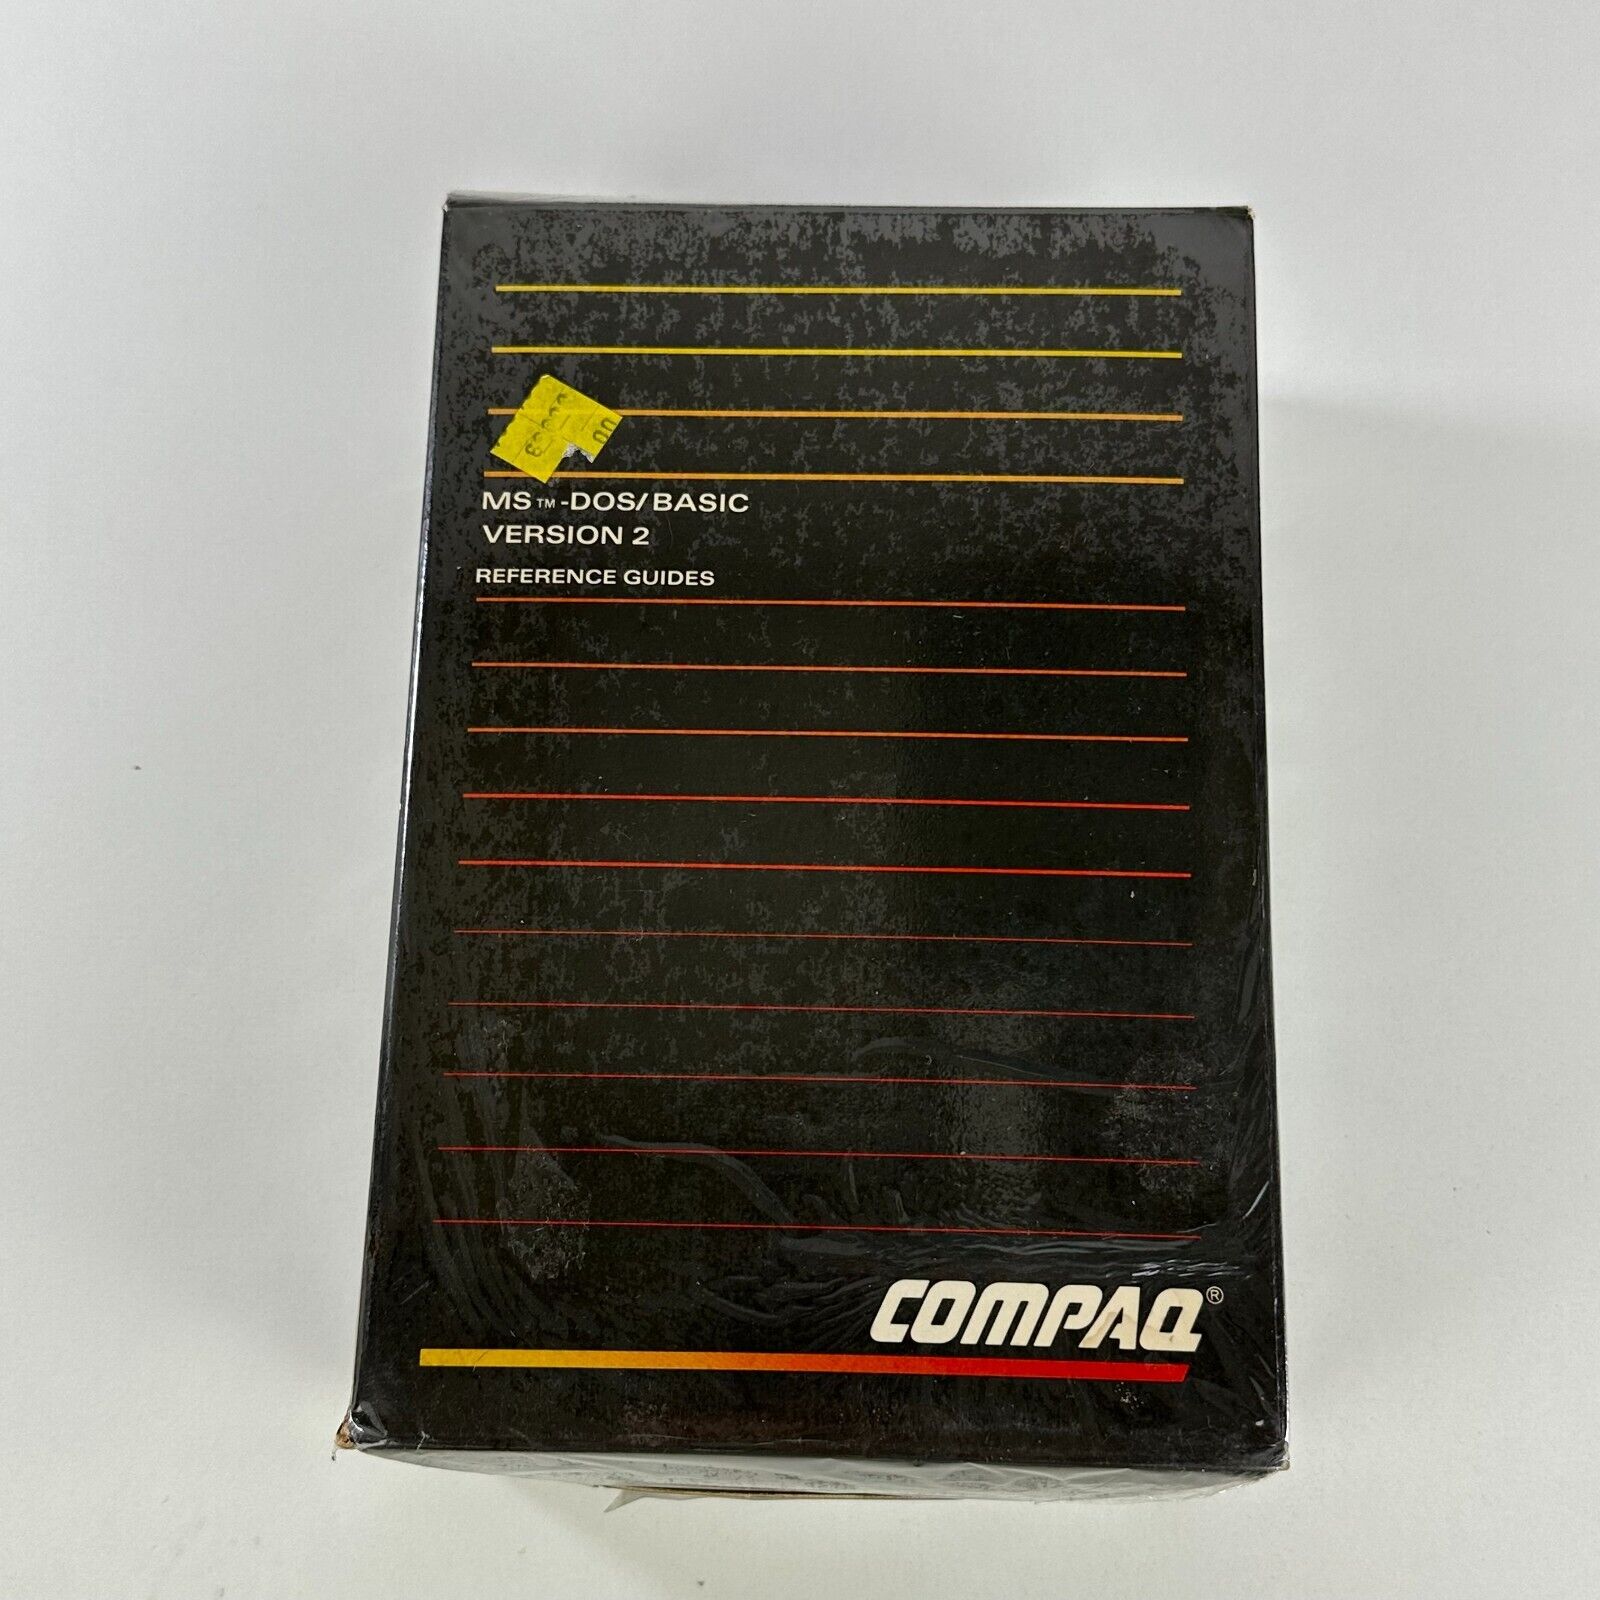 NEW Vtg COMPAQ MS DOS/BASIC Version 2 Reference Guides Factory Sealed